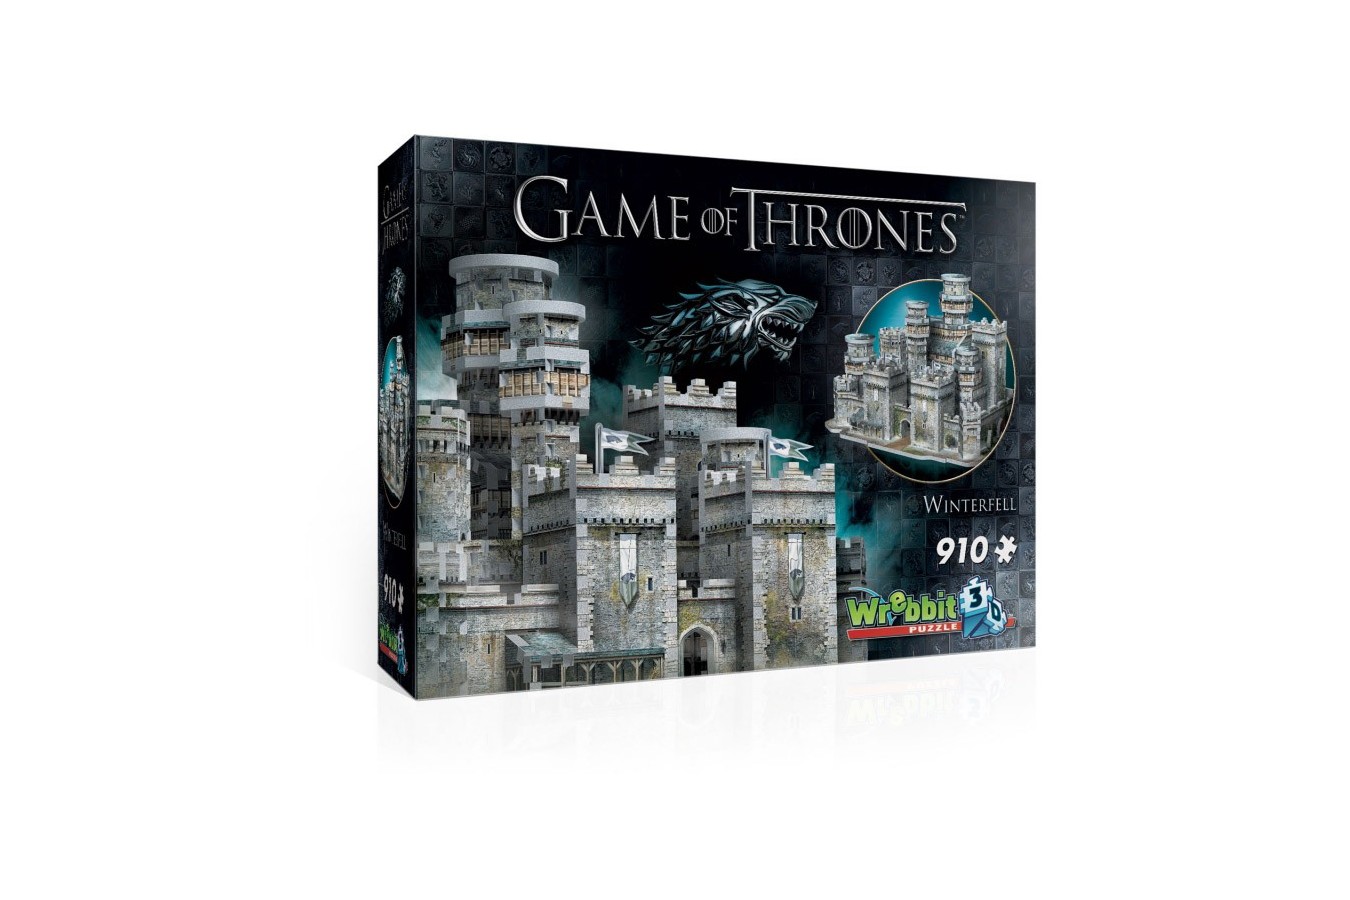 Puzzle 3D Wrebbit - Game of Thrones - Winterfell, 910 piese (3D-2018)